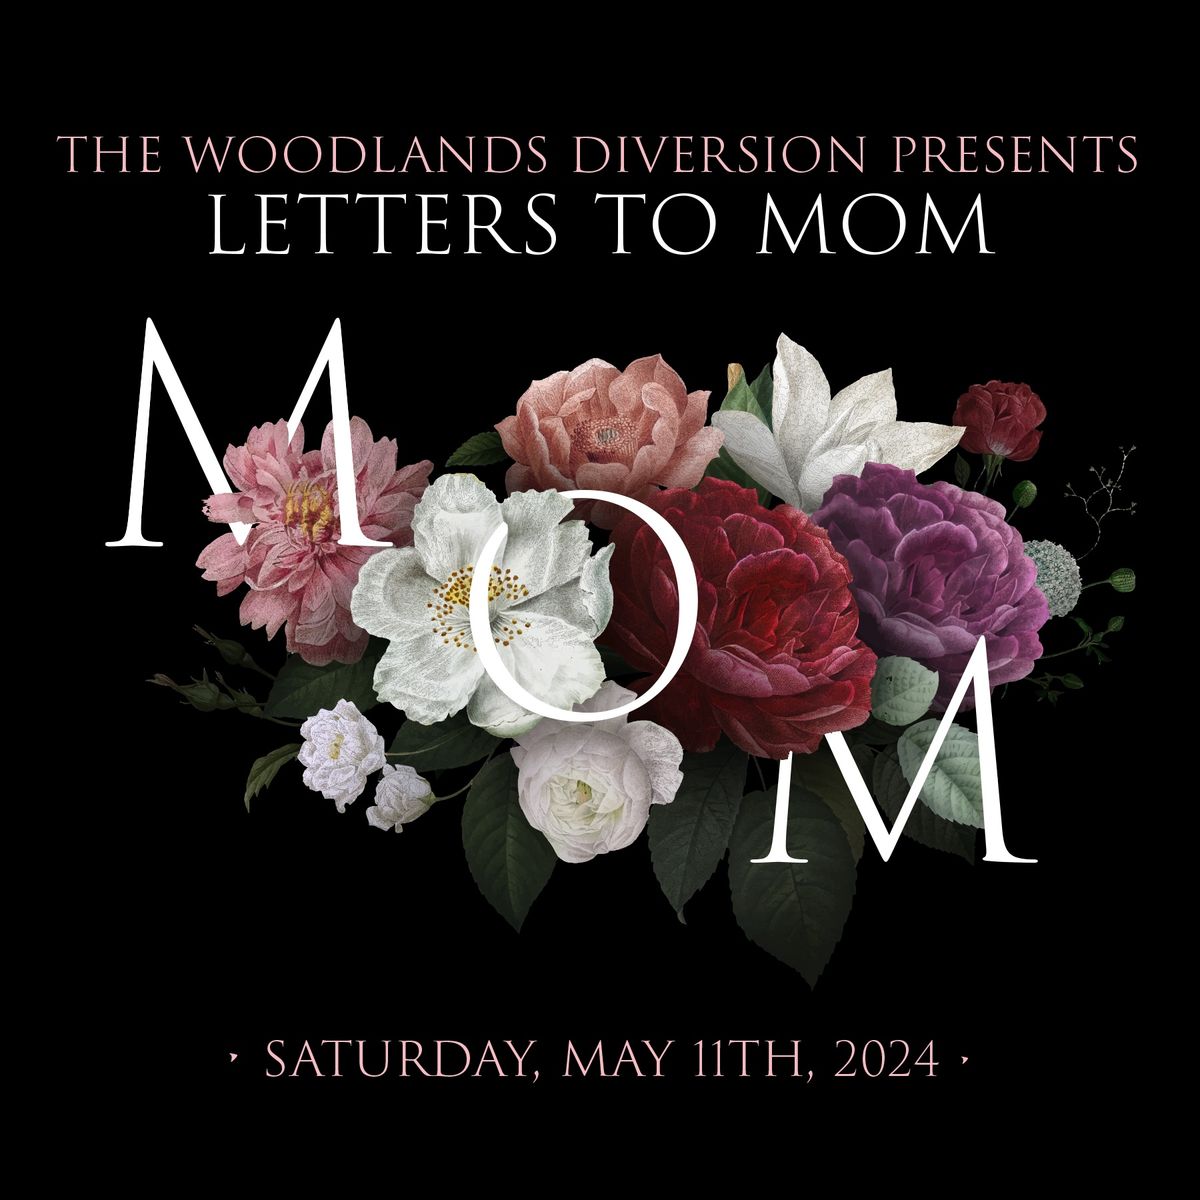 The Woodlands Diversion Presents: Letters to Mom